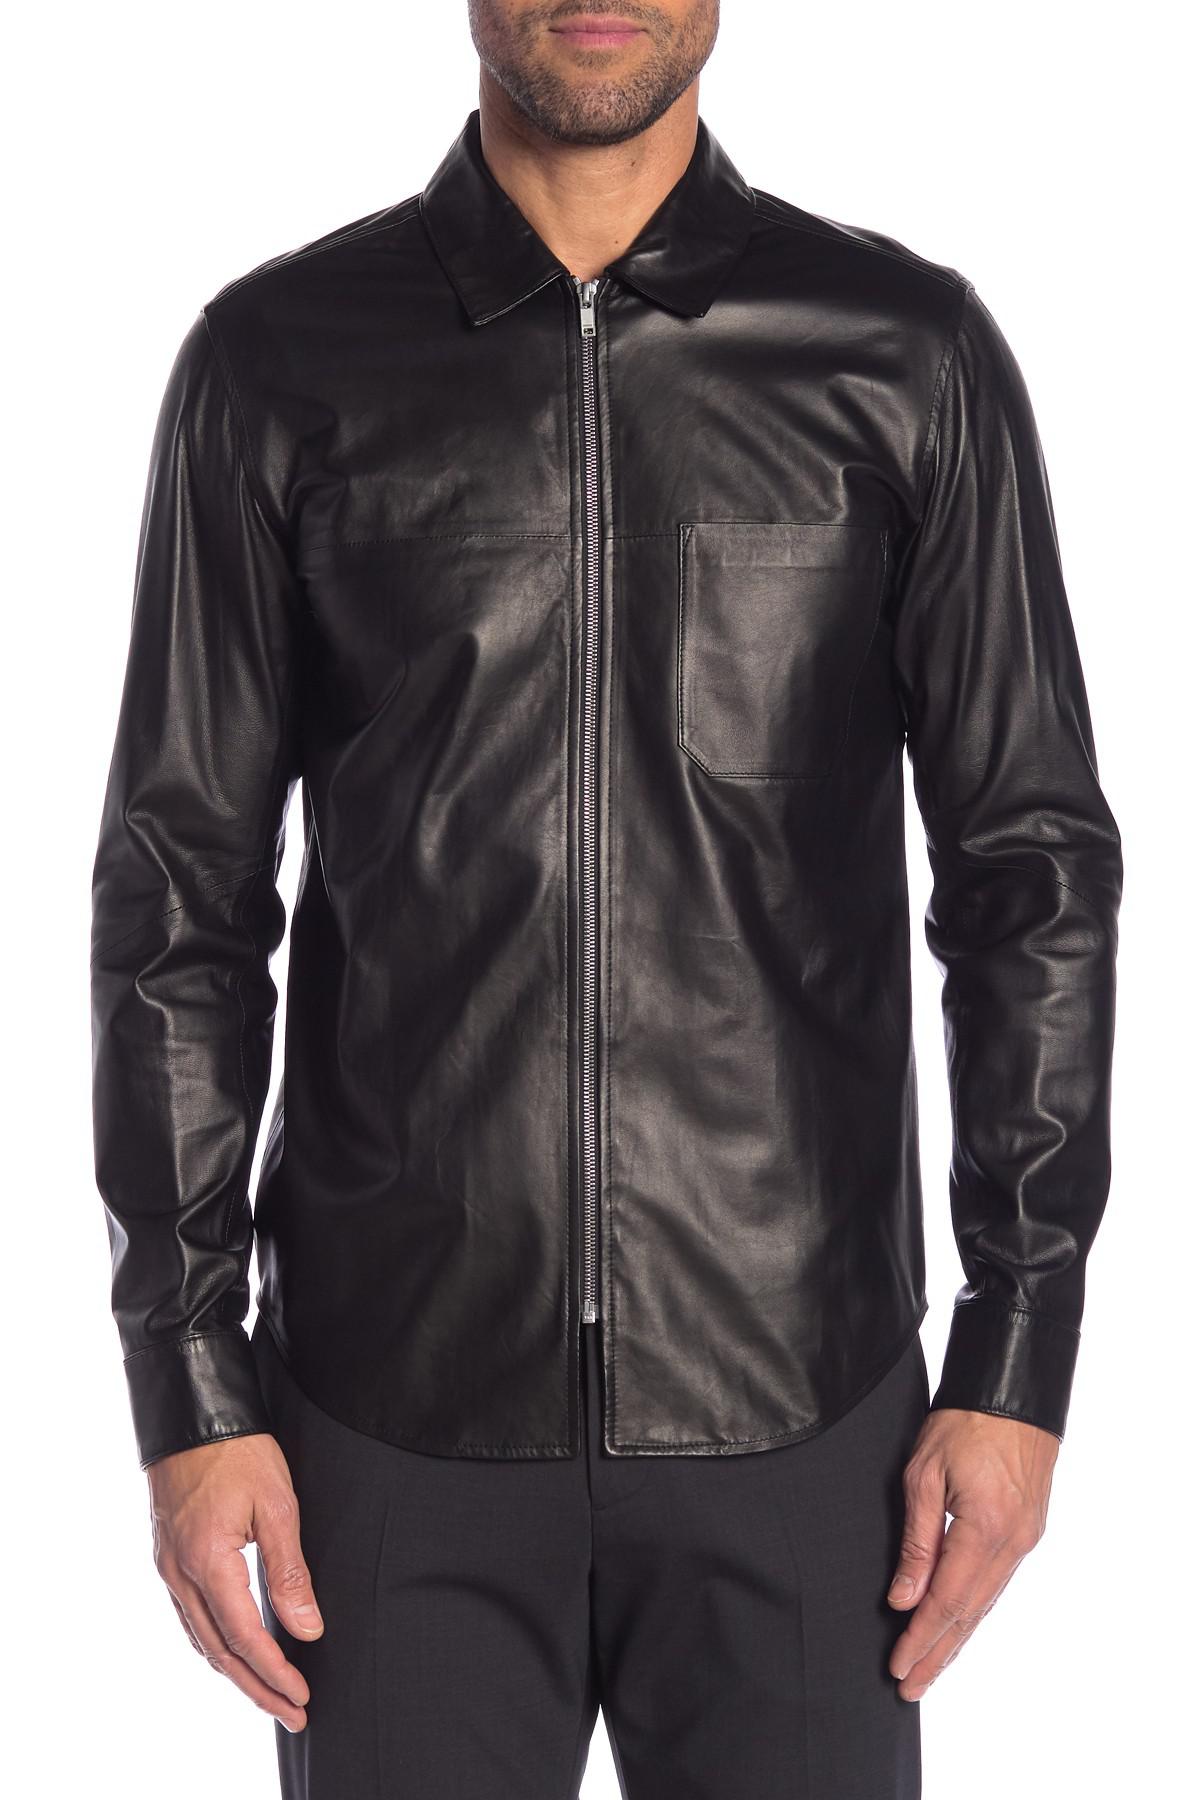 Theory One Pocket Zip Lamb Leather Shirt in Black for Men - Lyst